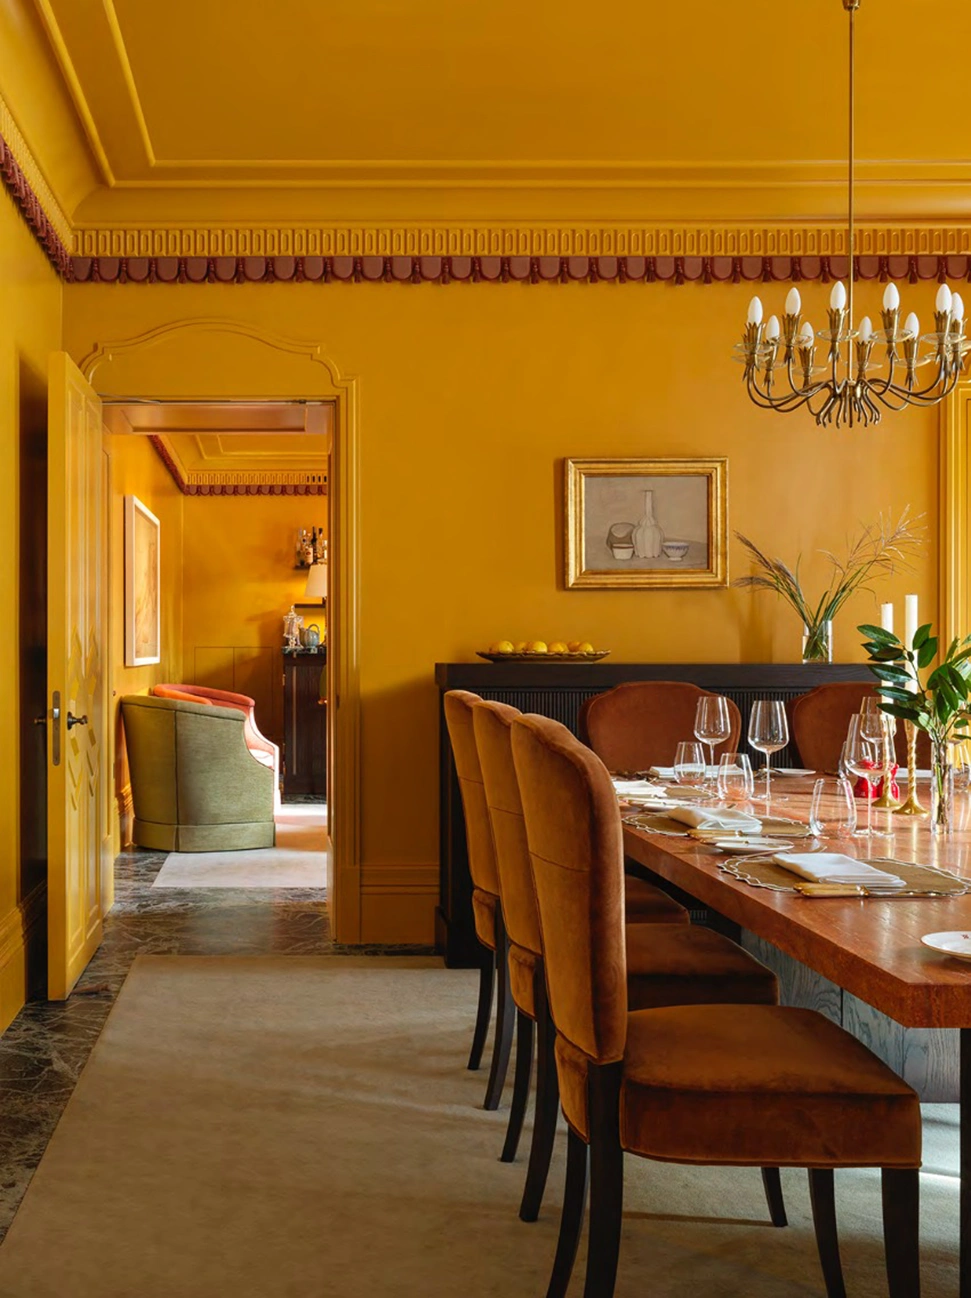 10 of the finest private dining rooms in London To Hire